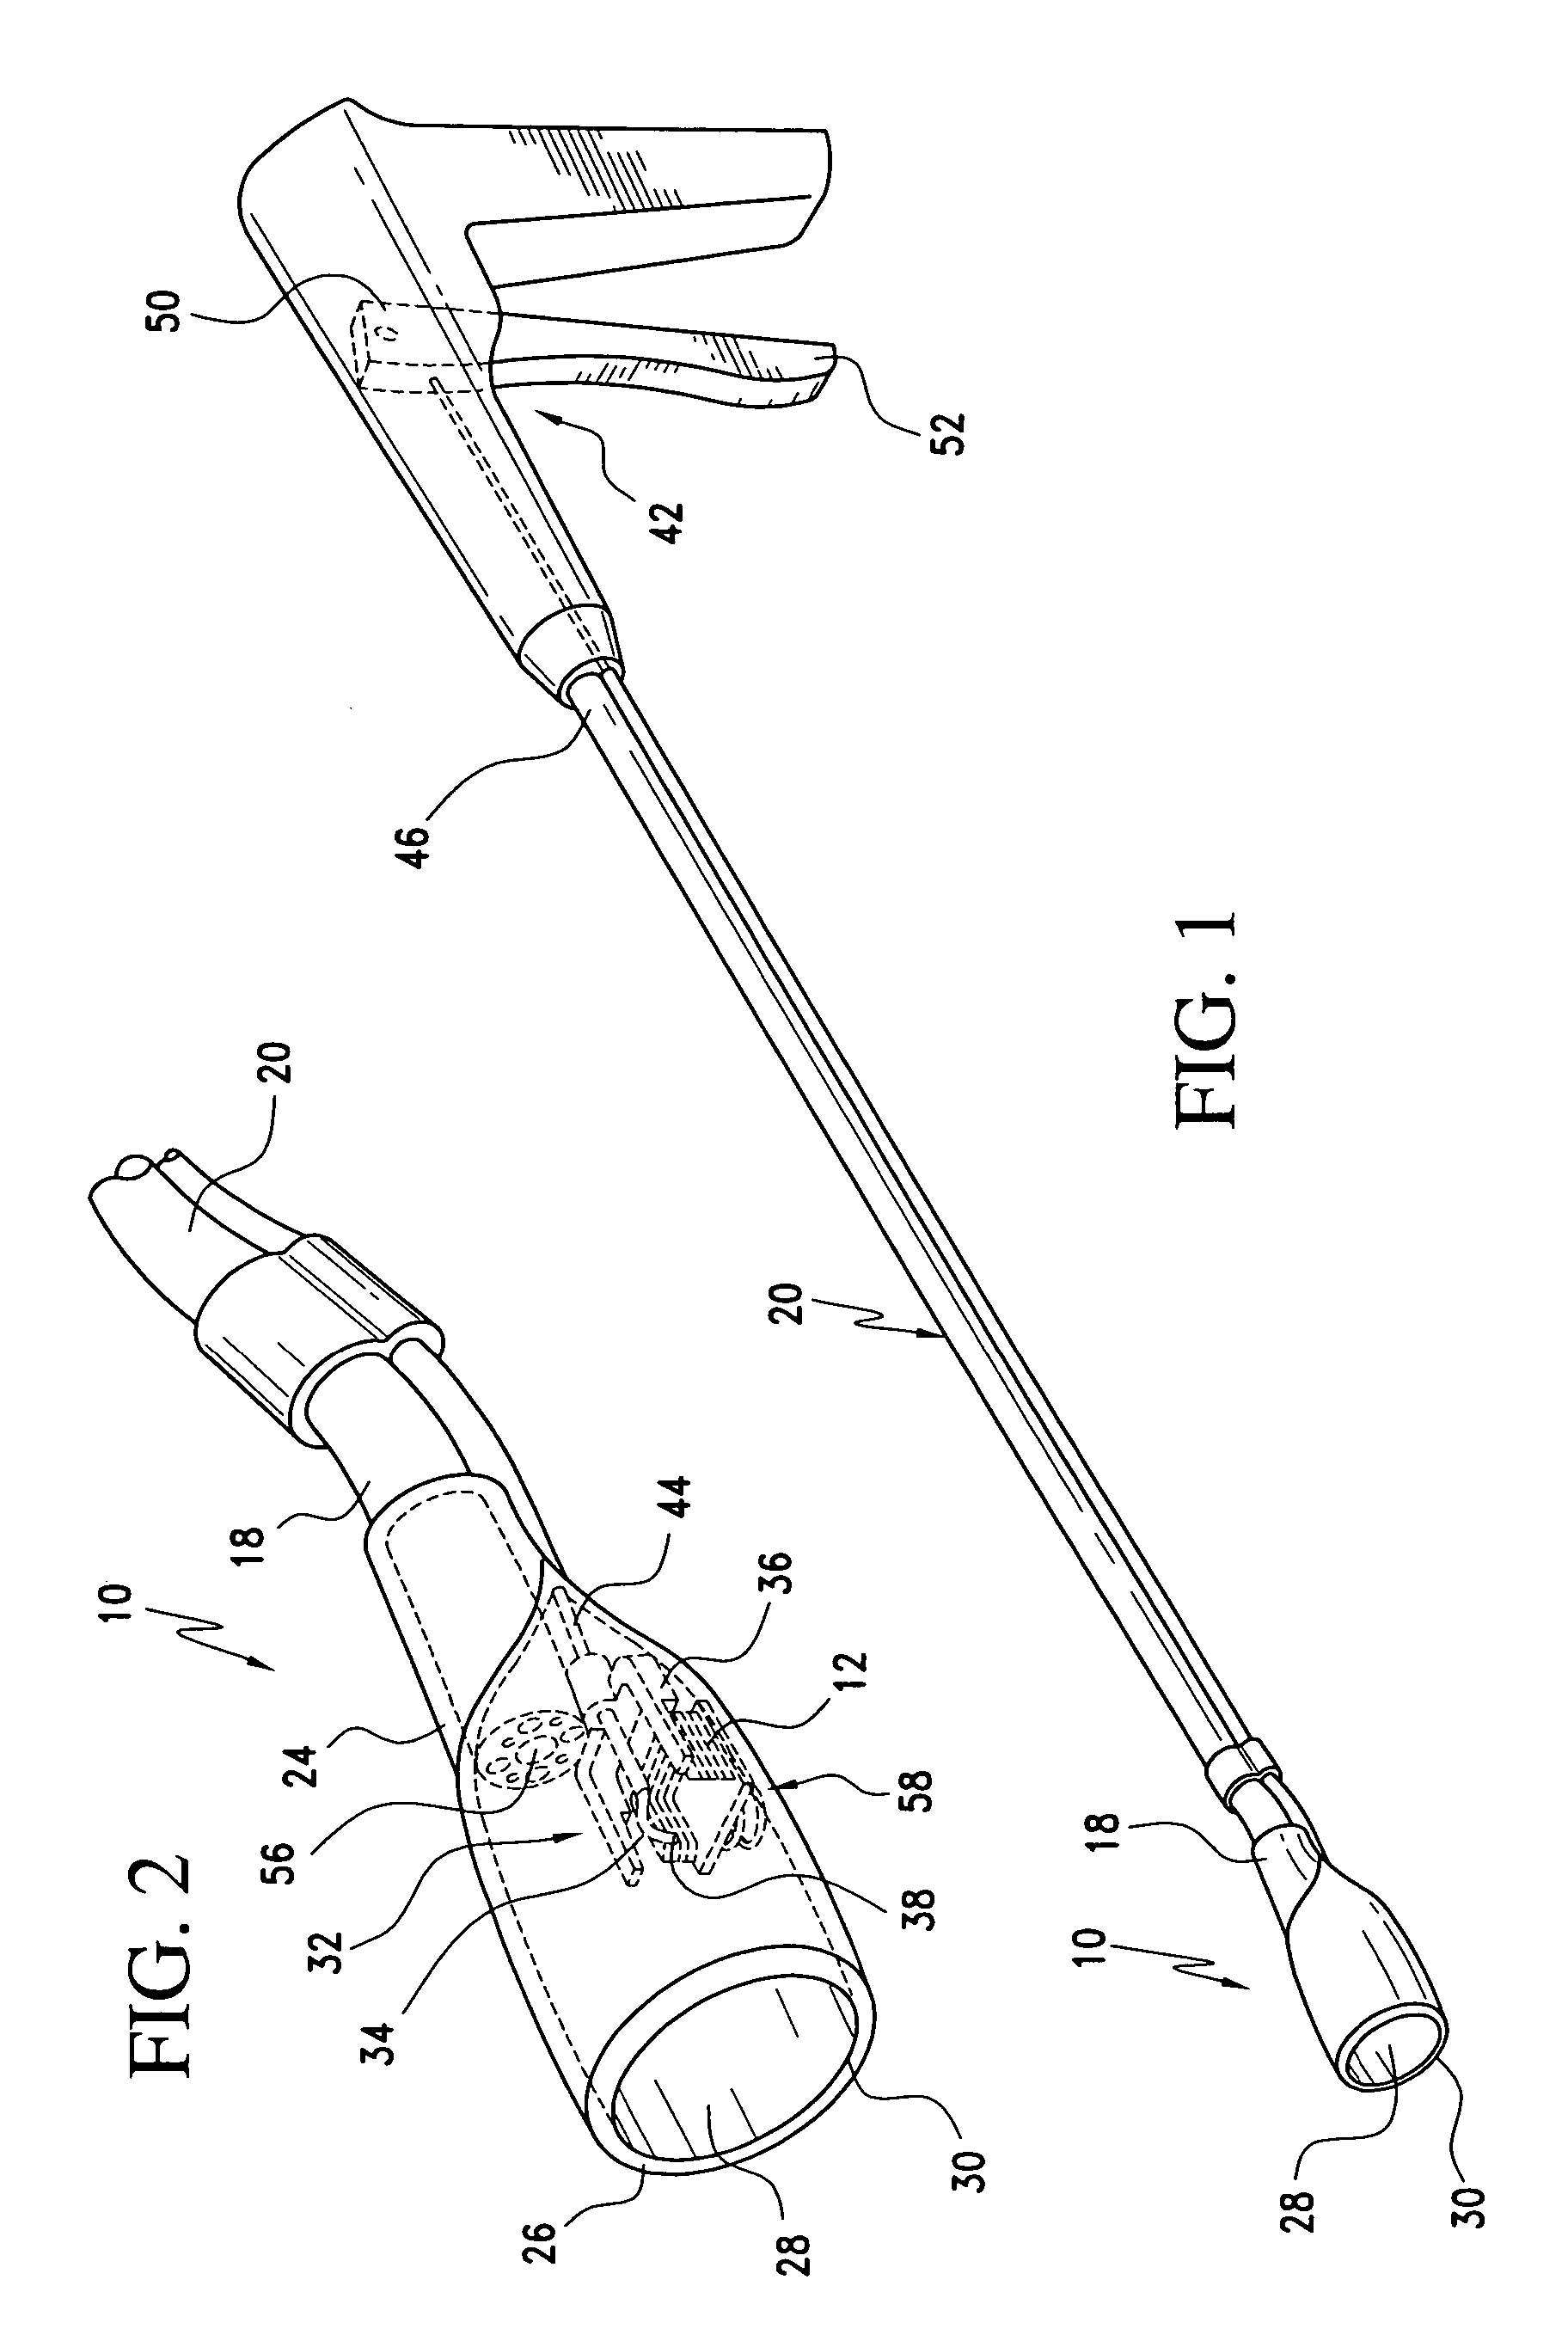 Method and apparatus for endoscopically performing gastric reduction surgery in a single pass